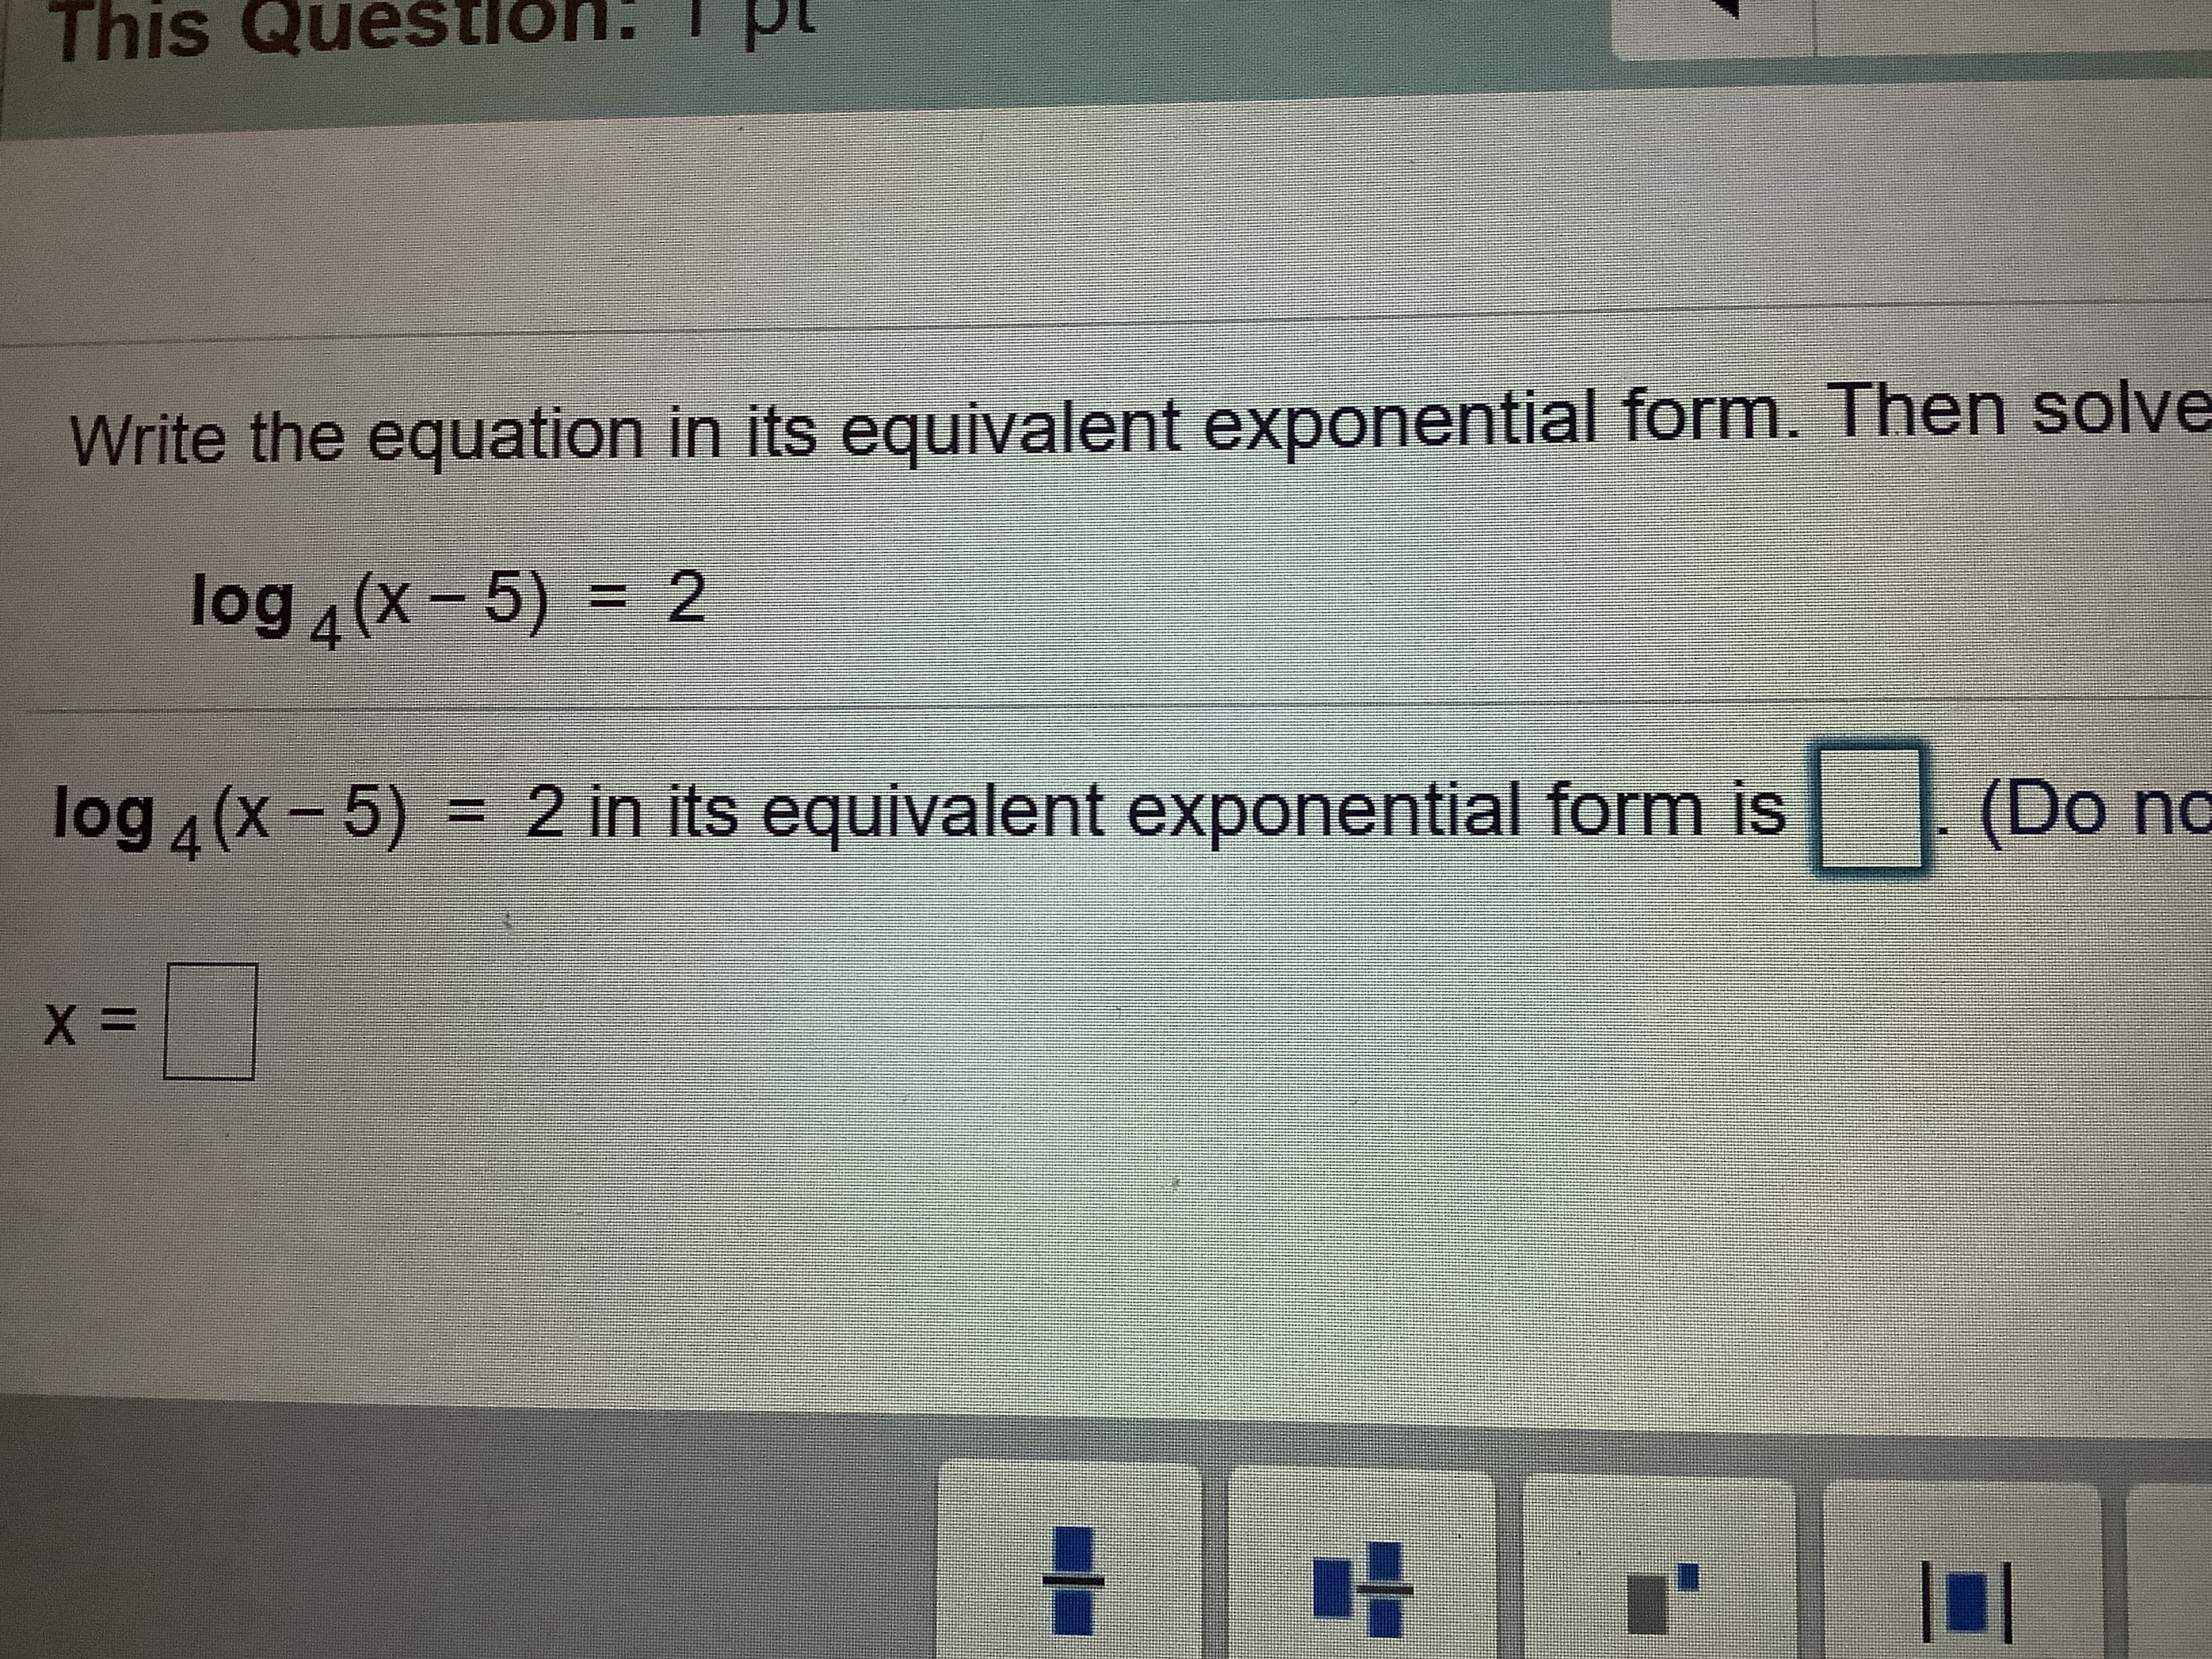 Write the equation in its equivalent exponential form. Then solve
log 4(x- 5) = 2
